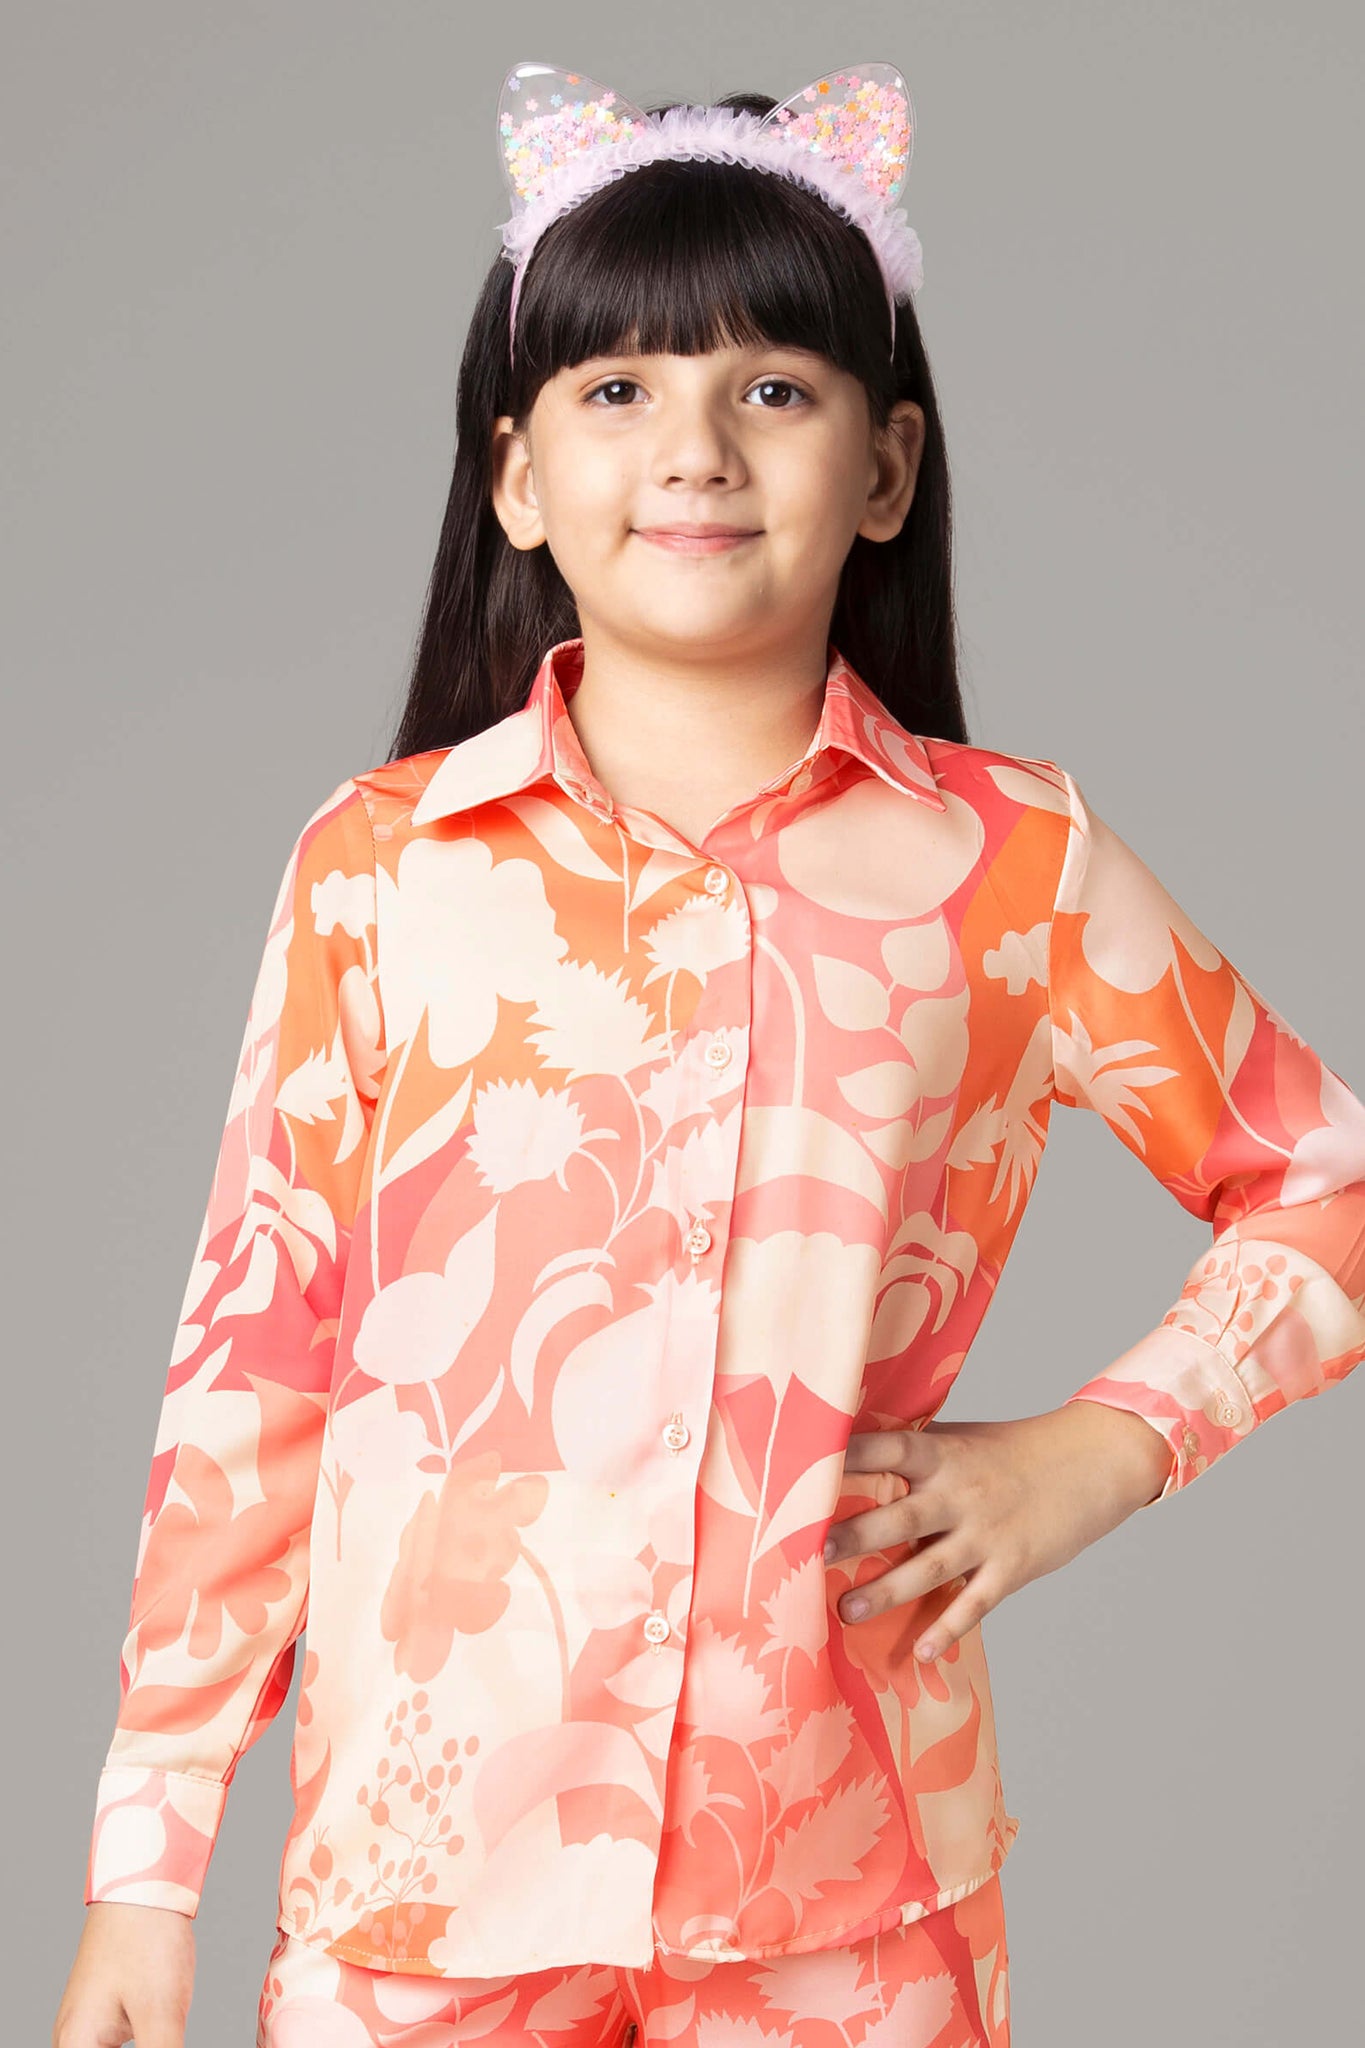 Beautiful Floral Shirt For Girls